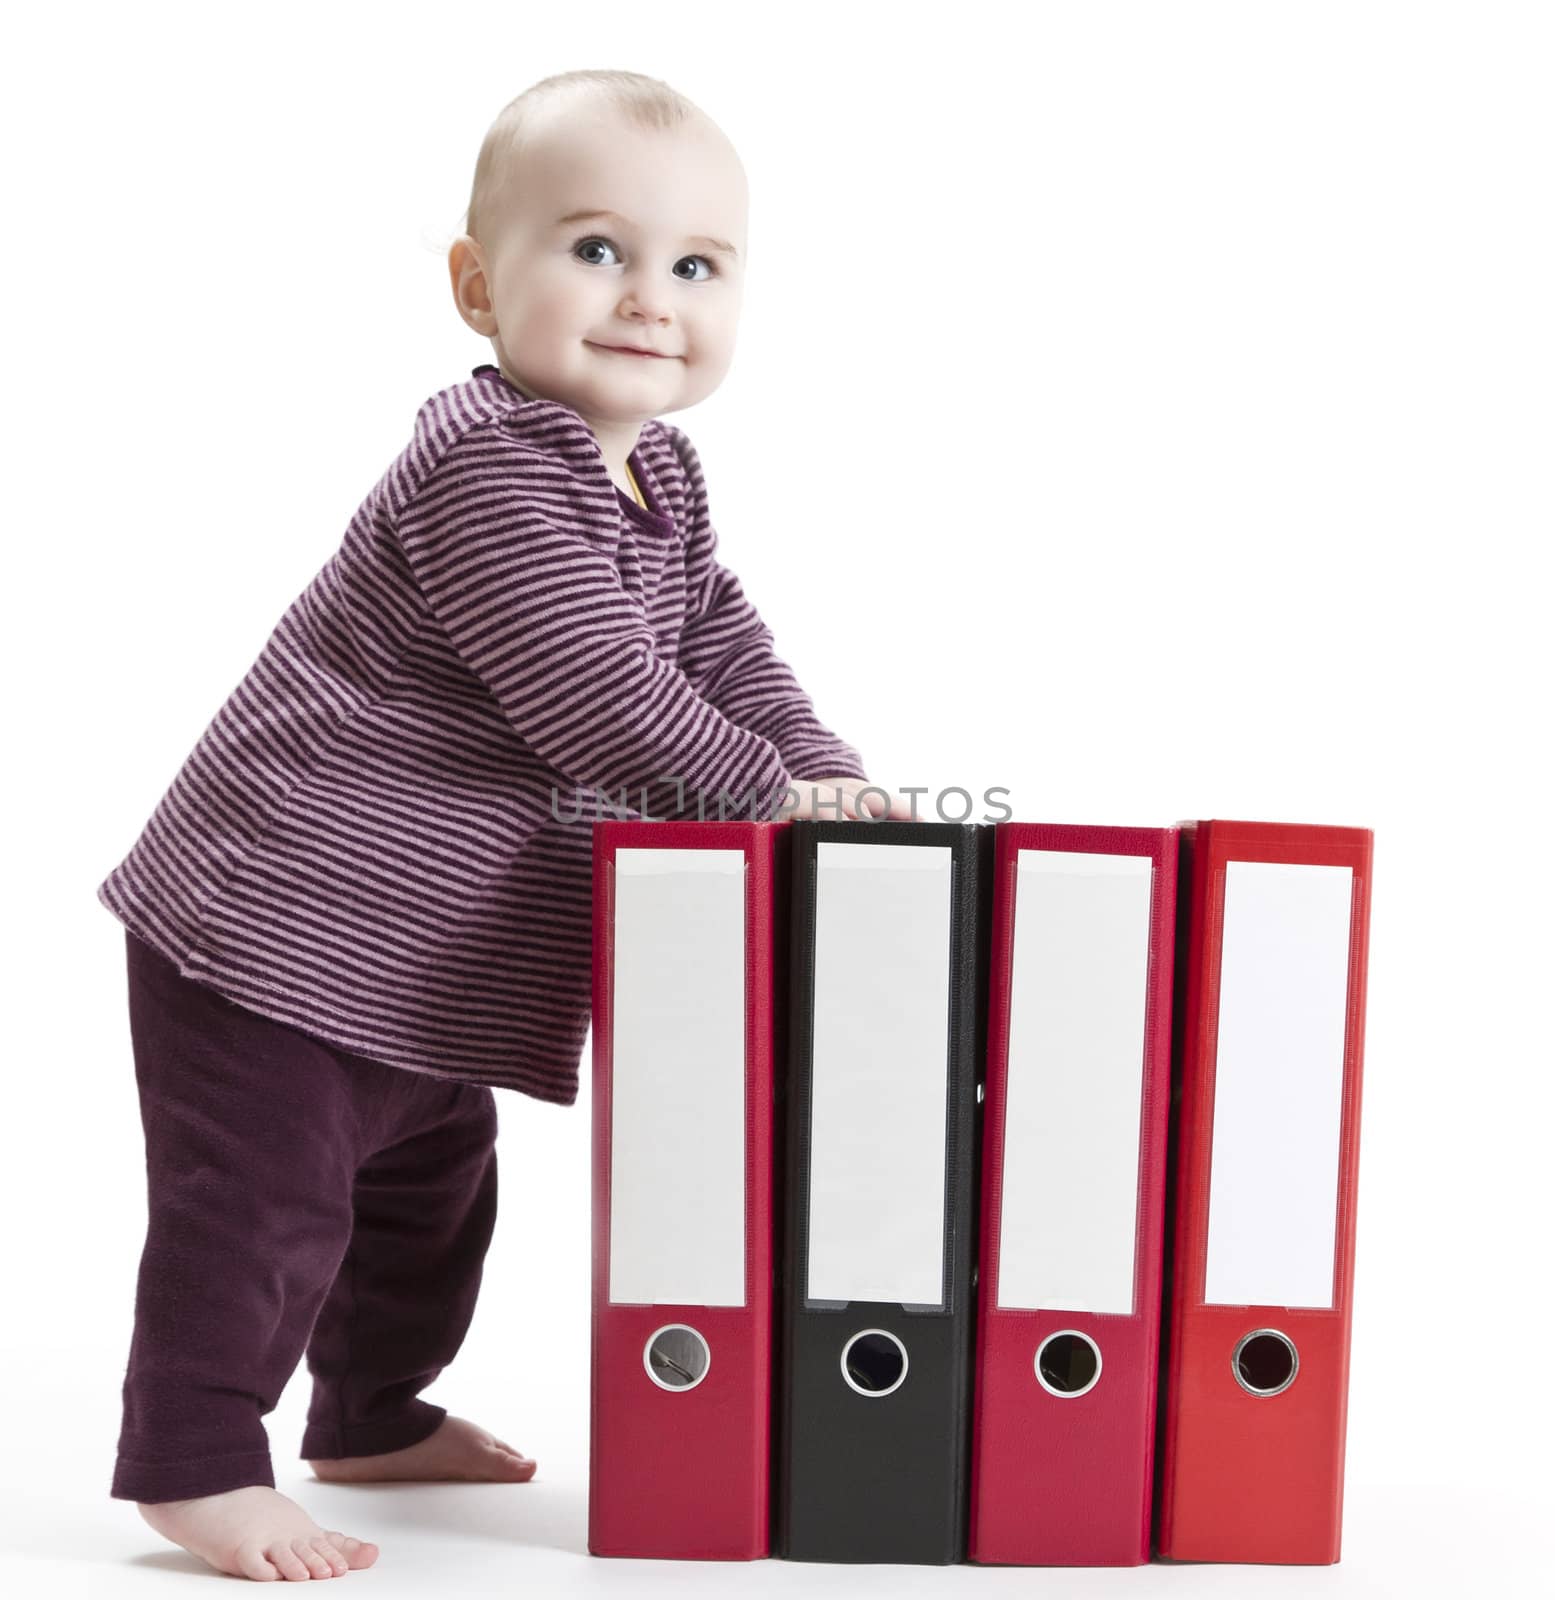 toddler standing next to four file folder in light background